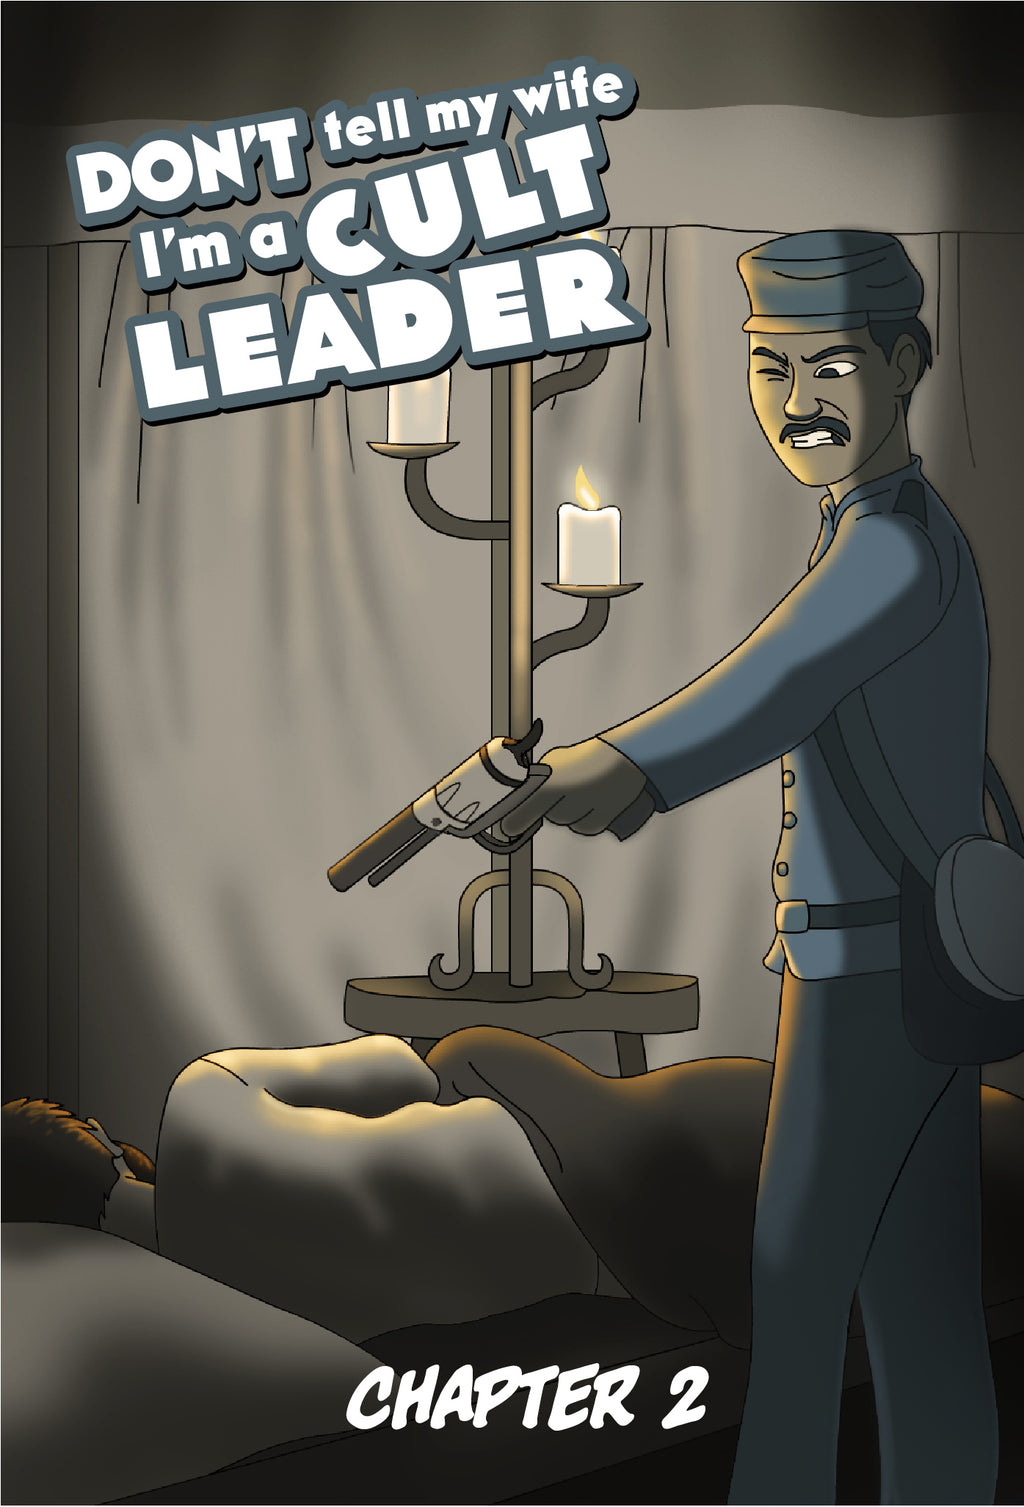 Cover of Chapter 2 of Don't Tell My Wife I'm a Cult Leader. We see a Civil War soldier about to put a bullet in a sleeping officer.